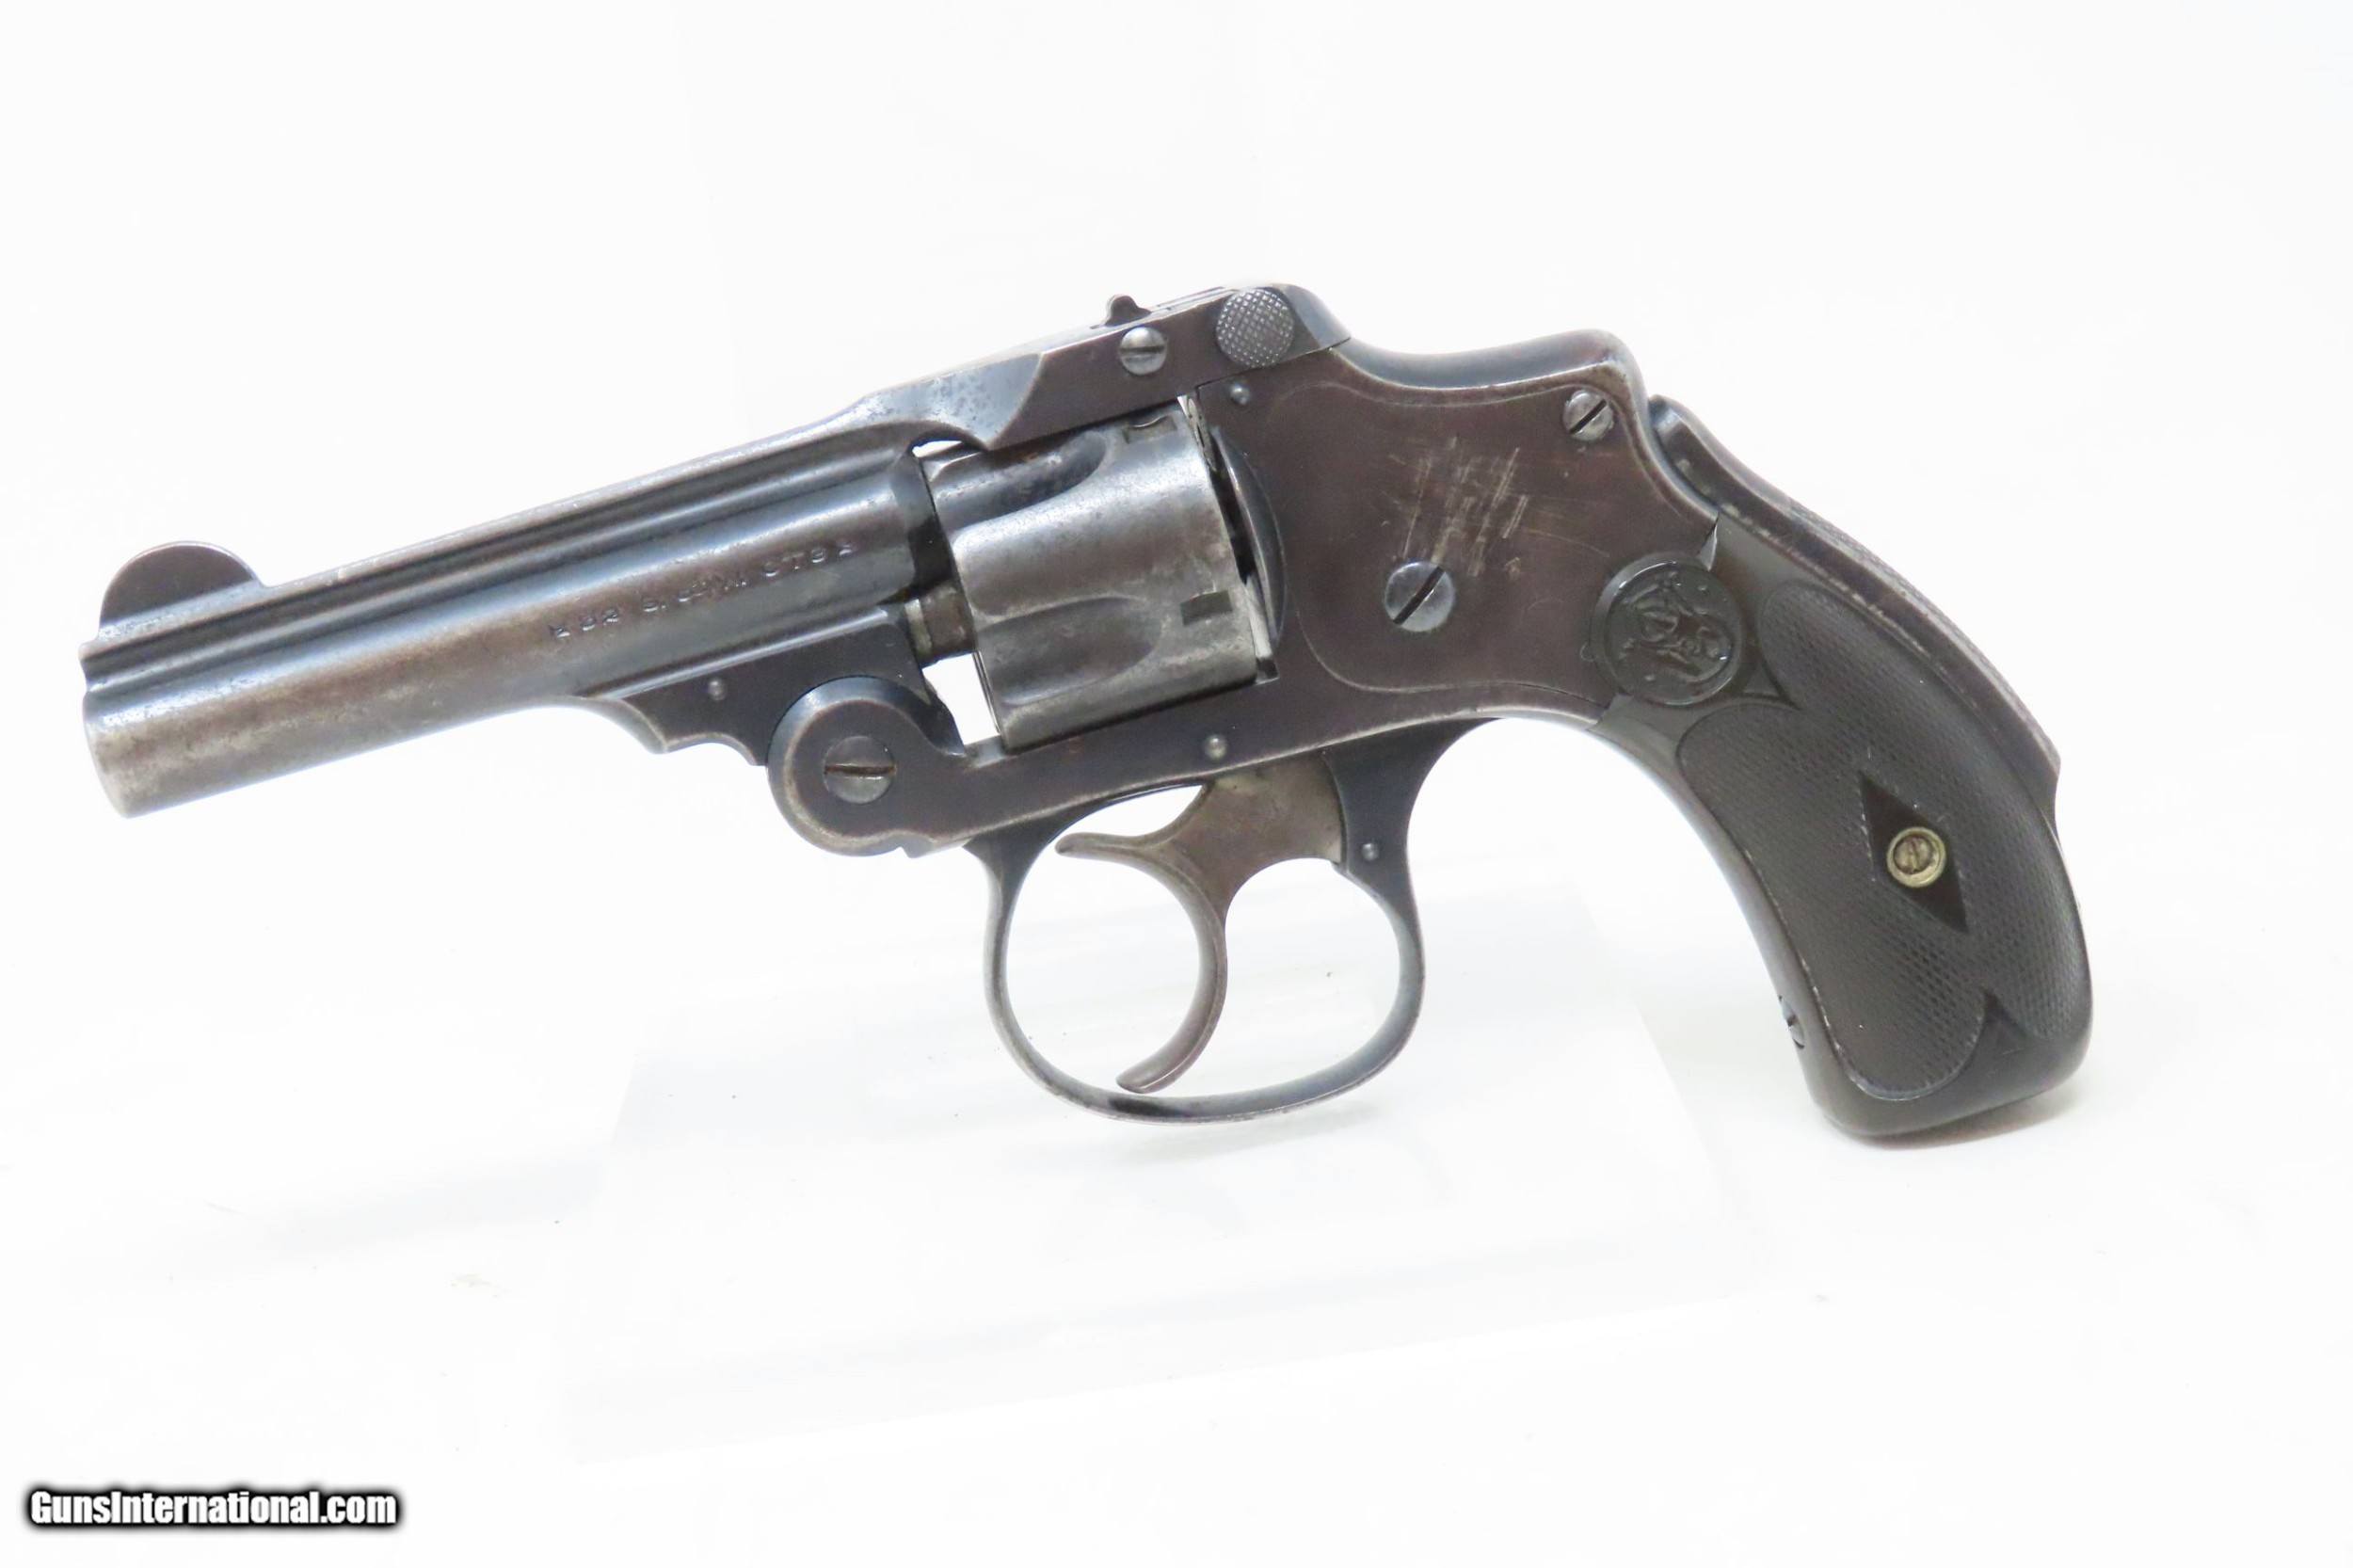 Smith and Wesson type revolver, five shots, caliber 32, …